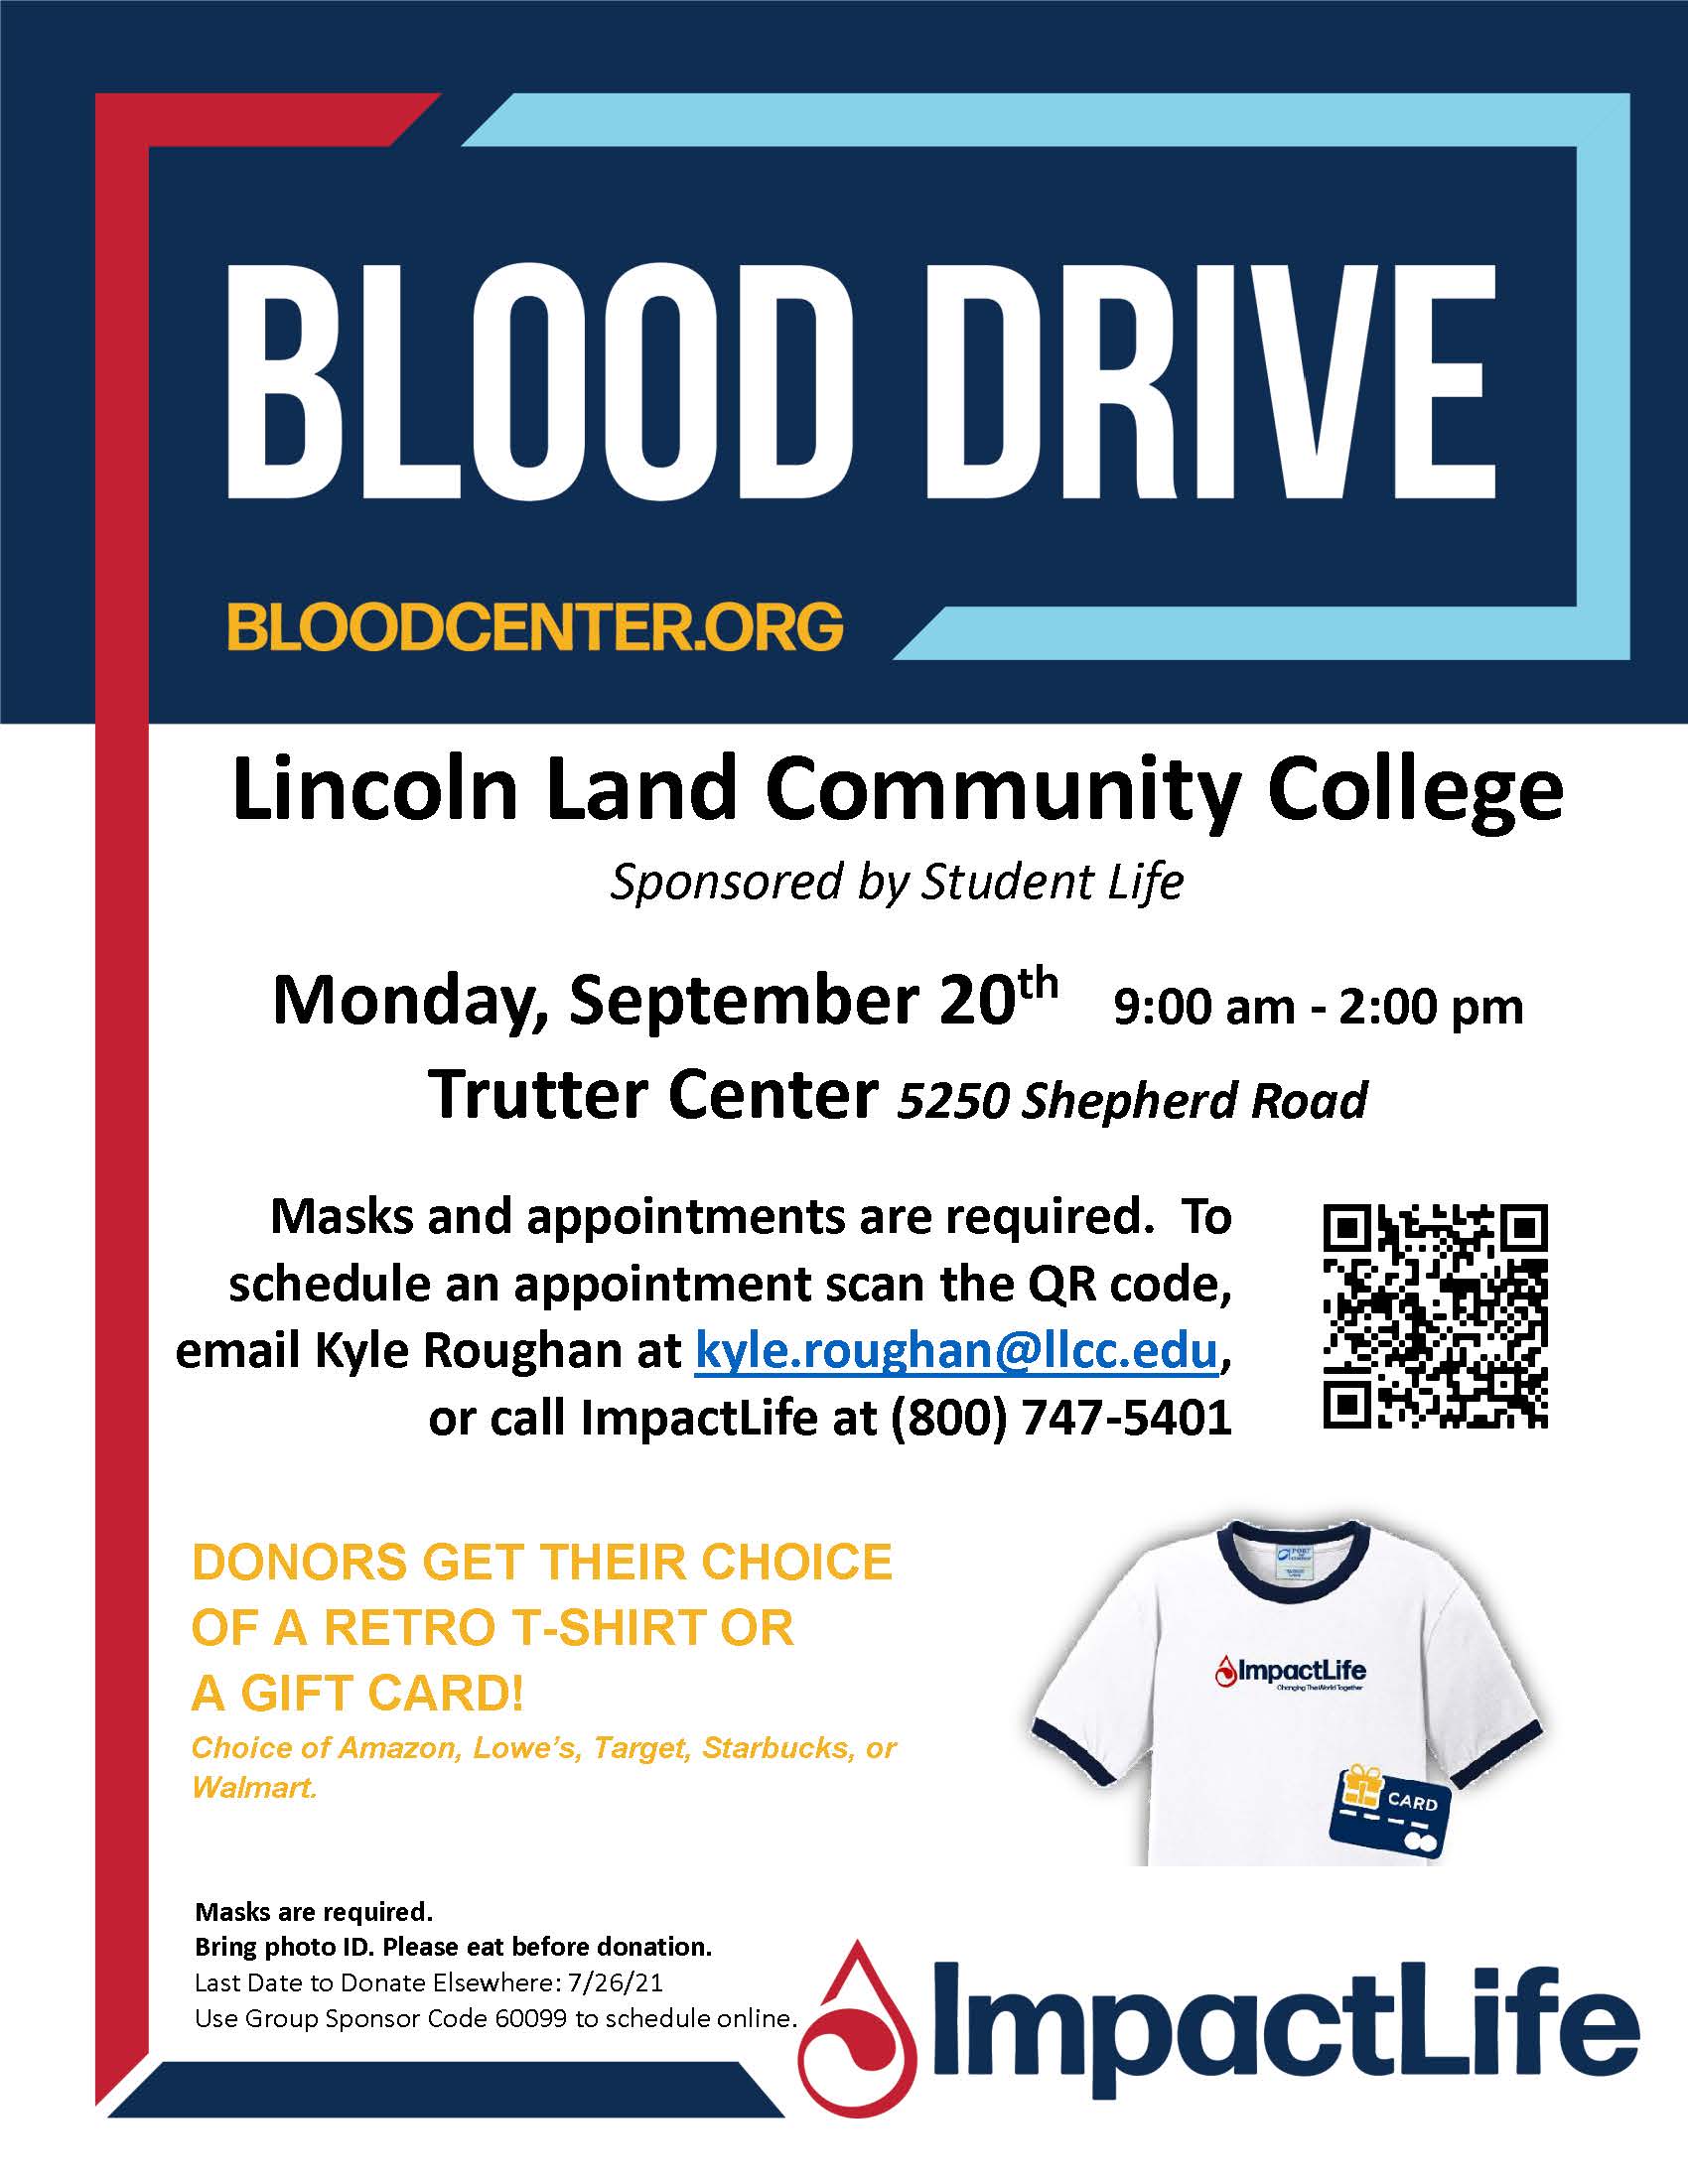 Blood Drive (BLOODCENTER.ORG) at Lincoln Land Community College, sponsored by Student Life. Monday, September 20th, 9:00 AM to 2:00 PM in the Trutter Center (5250 Shepherd Road). Masks and appointments are required. To schedule an appointment, email Kyle Roughan at kyle.roughan@llcc.edu or call ImpactLife at (800) 747-5401. Donners get their choice of a retro T-Shirt or a gift card (choice of Amazon, Lowe’s, Target, Starbucks, or Walmart) Masks are Required. Bring photo ID. Please eat before donation. The last date to donate elsewhere is 7/26/21. Use group sponsor code 6099 to schedule online.